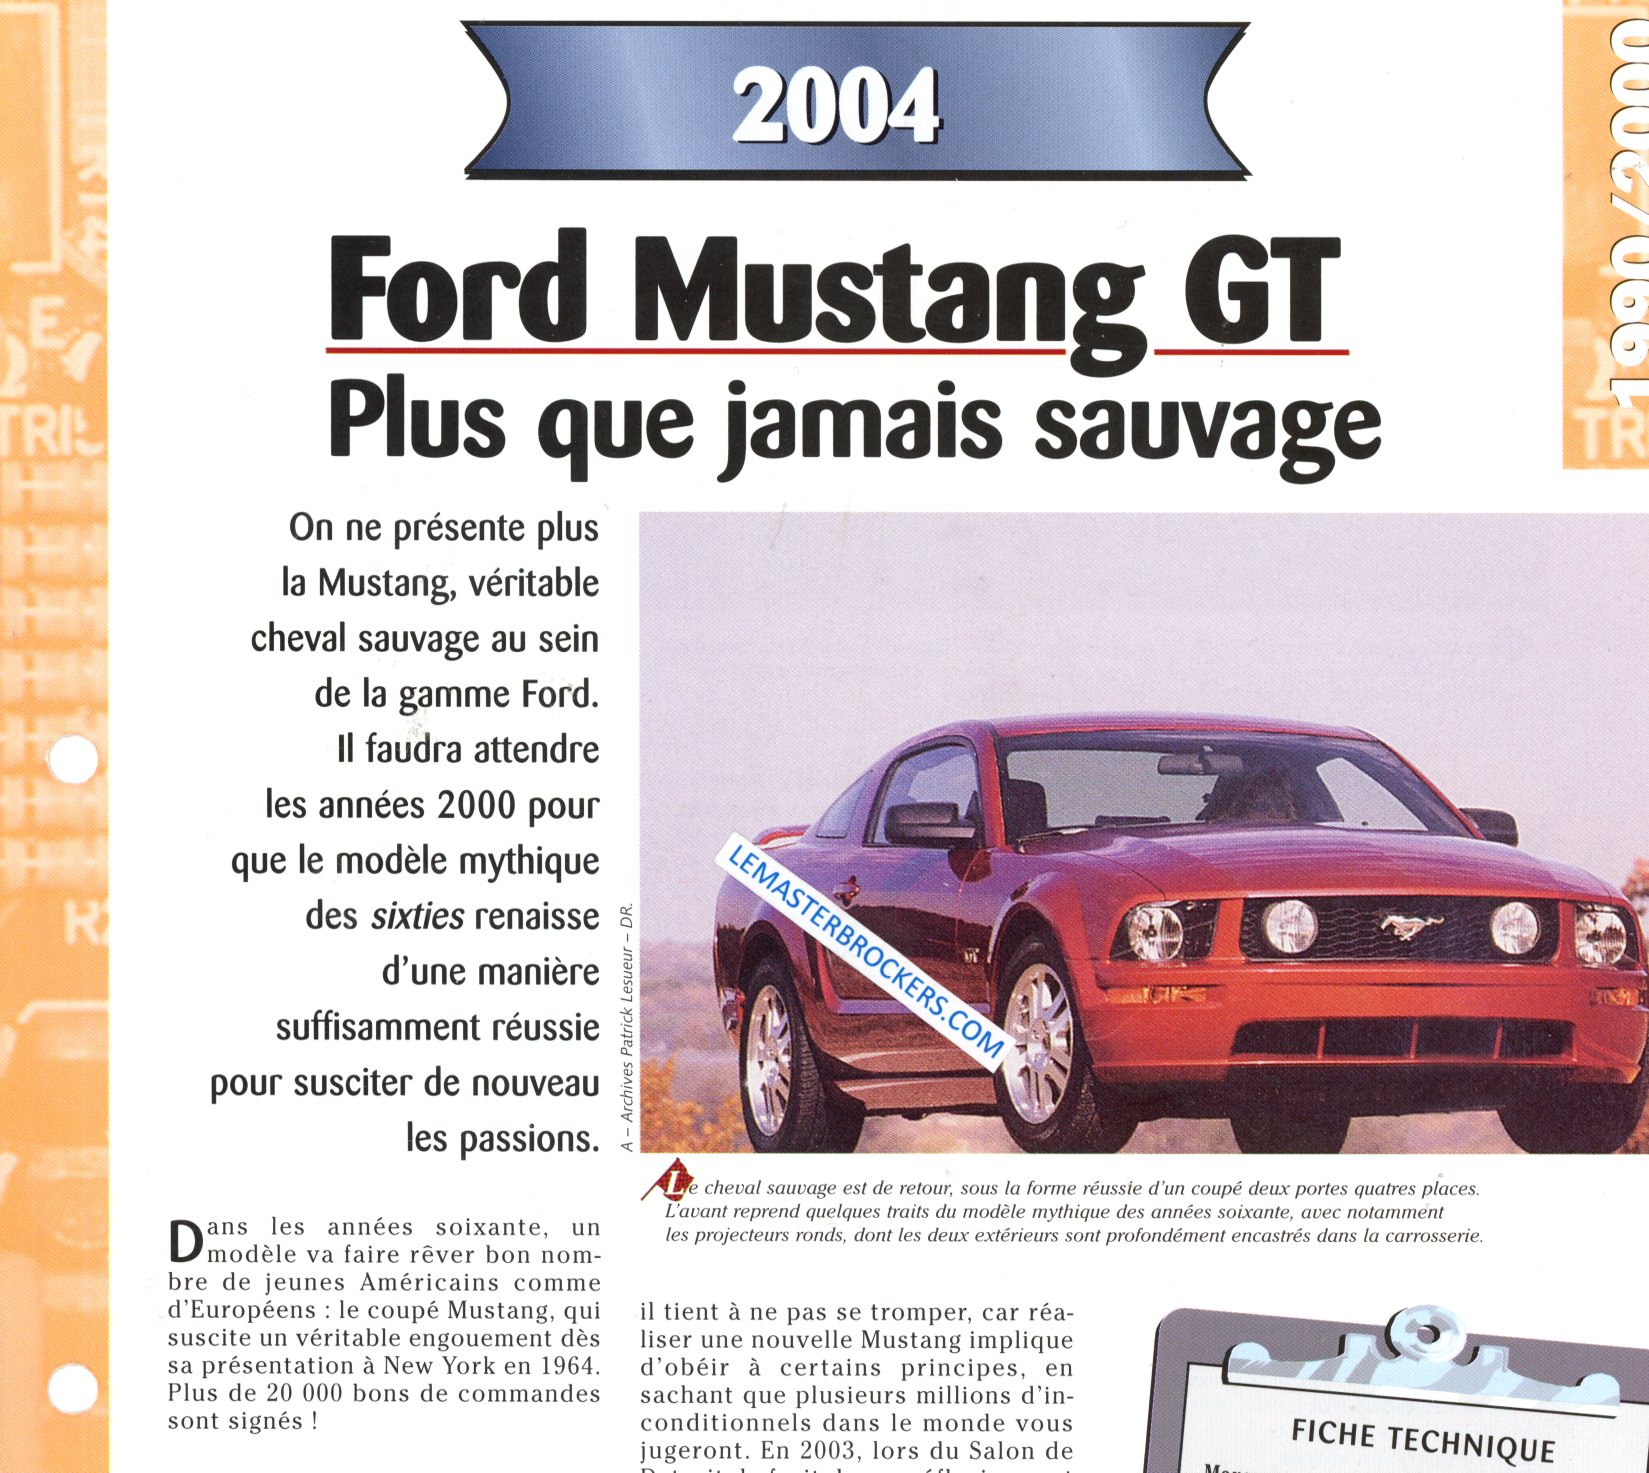 FORD MUSTANG GT 2004 FICHE TECHNIQUE